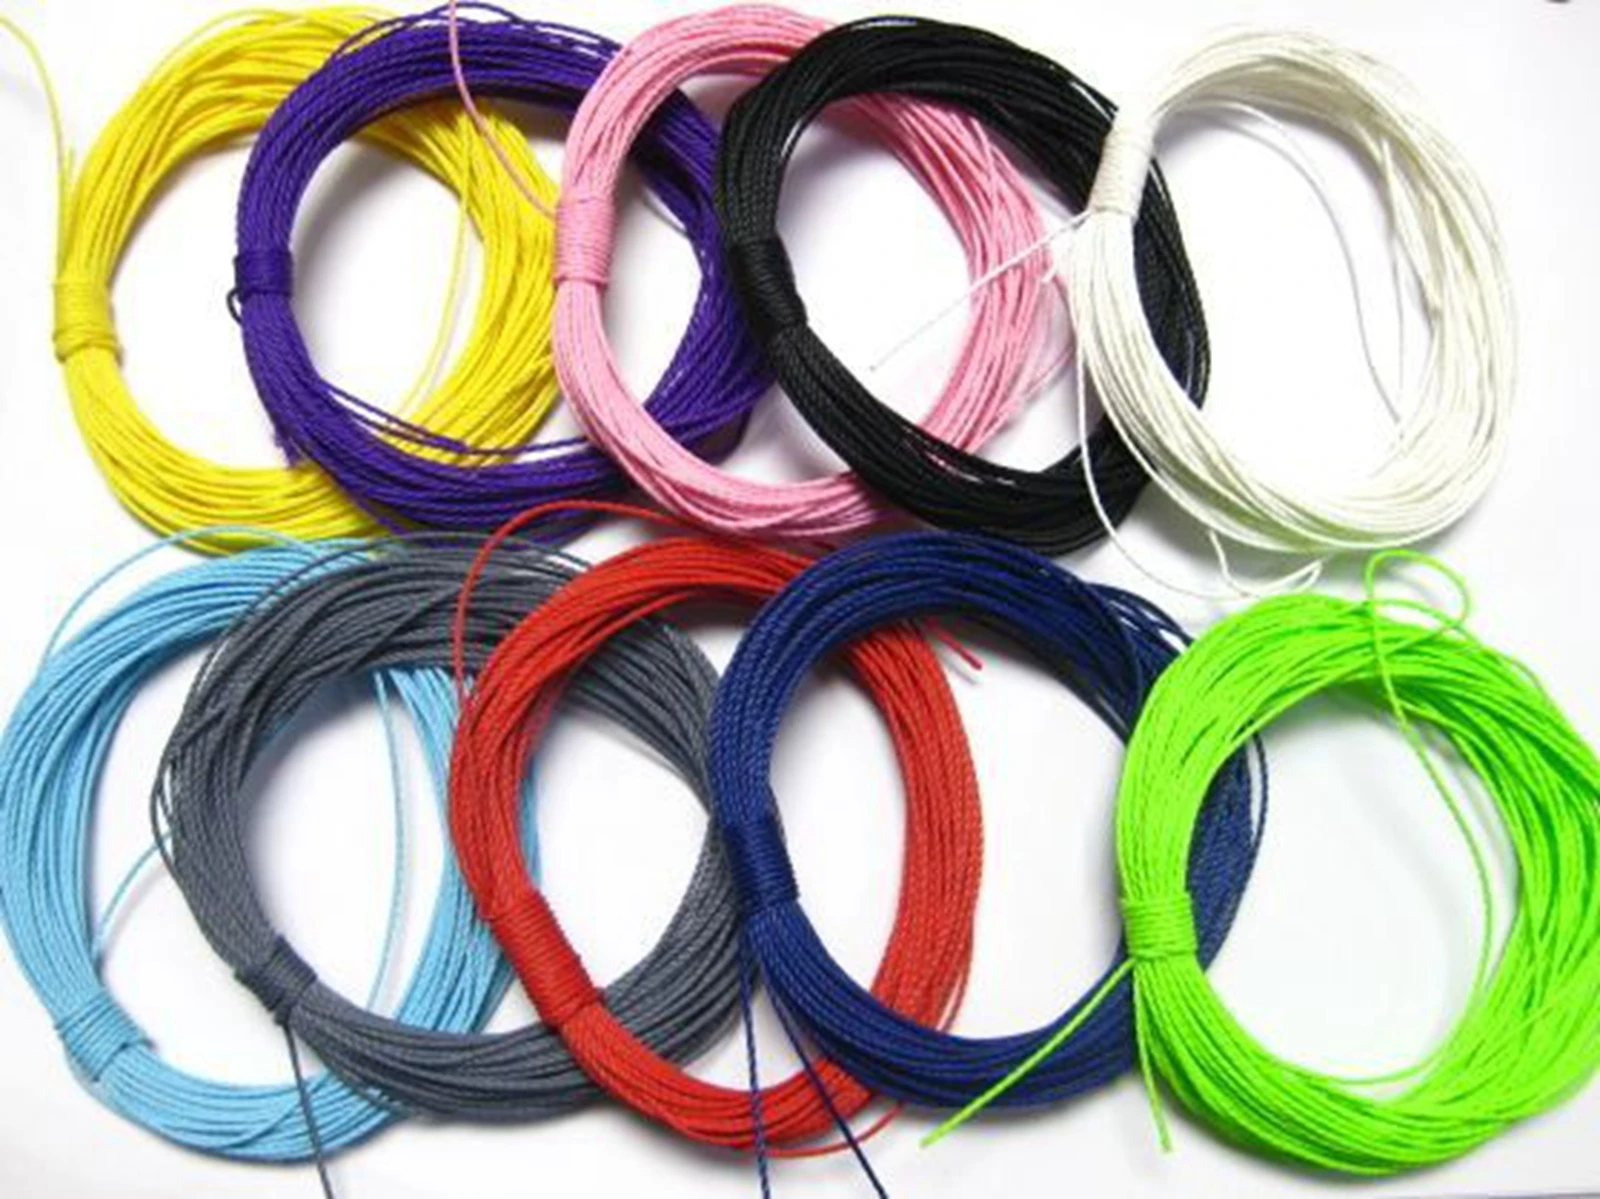 100 Meters Waxed Polyester Twisted Cord 1mm Macrame String Linen Thread Various